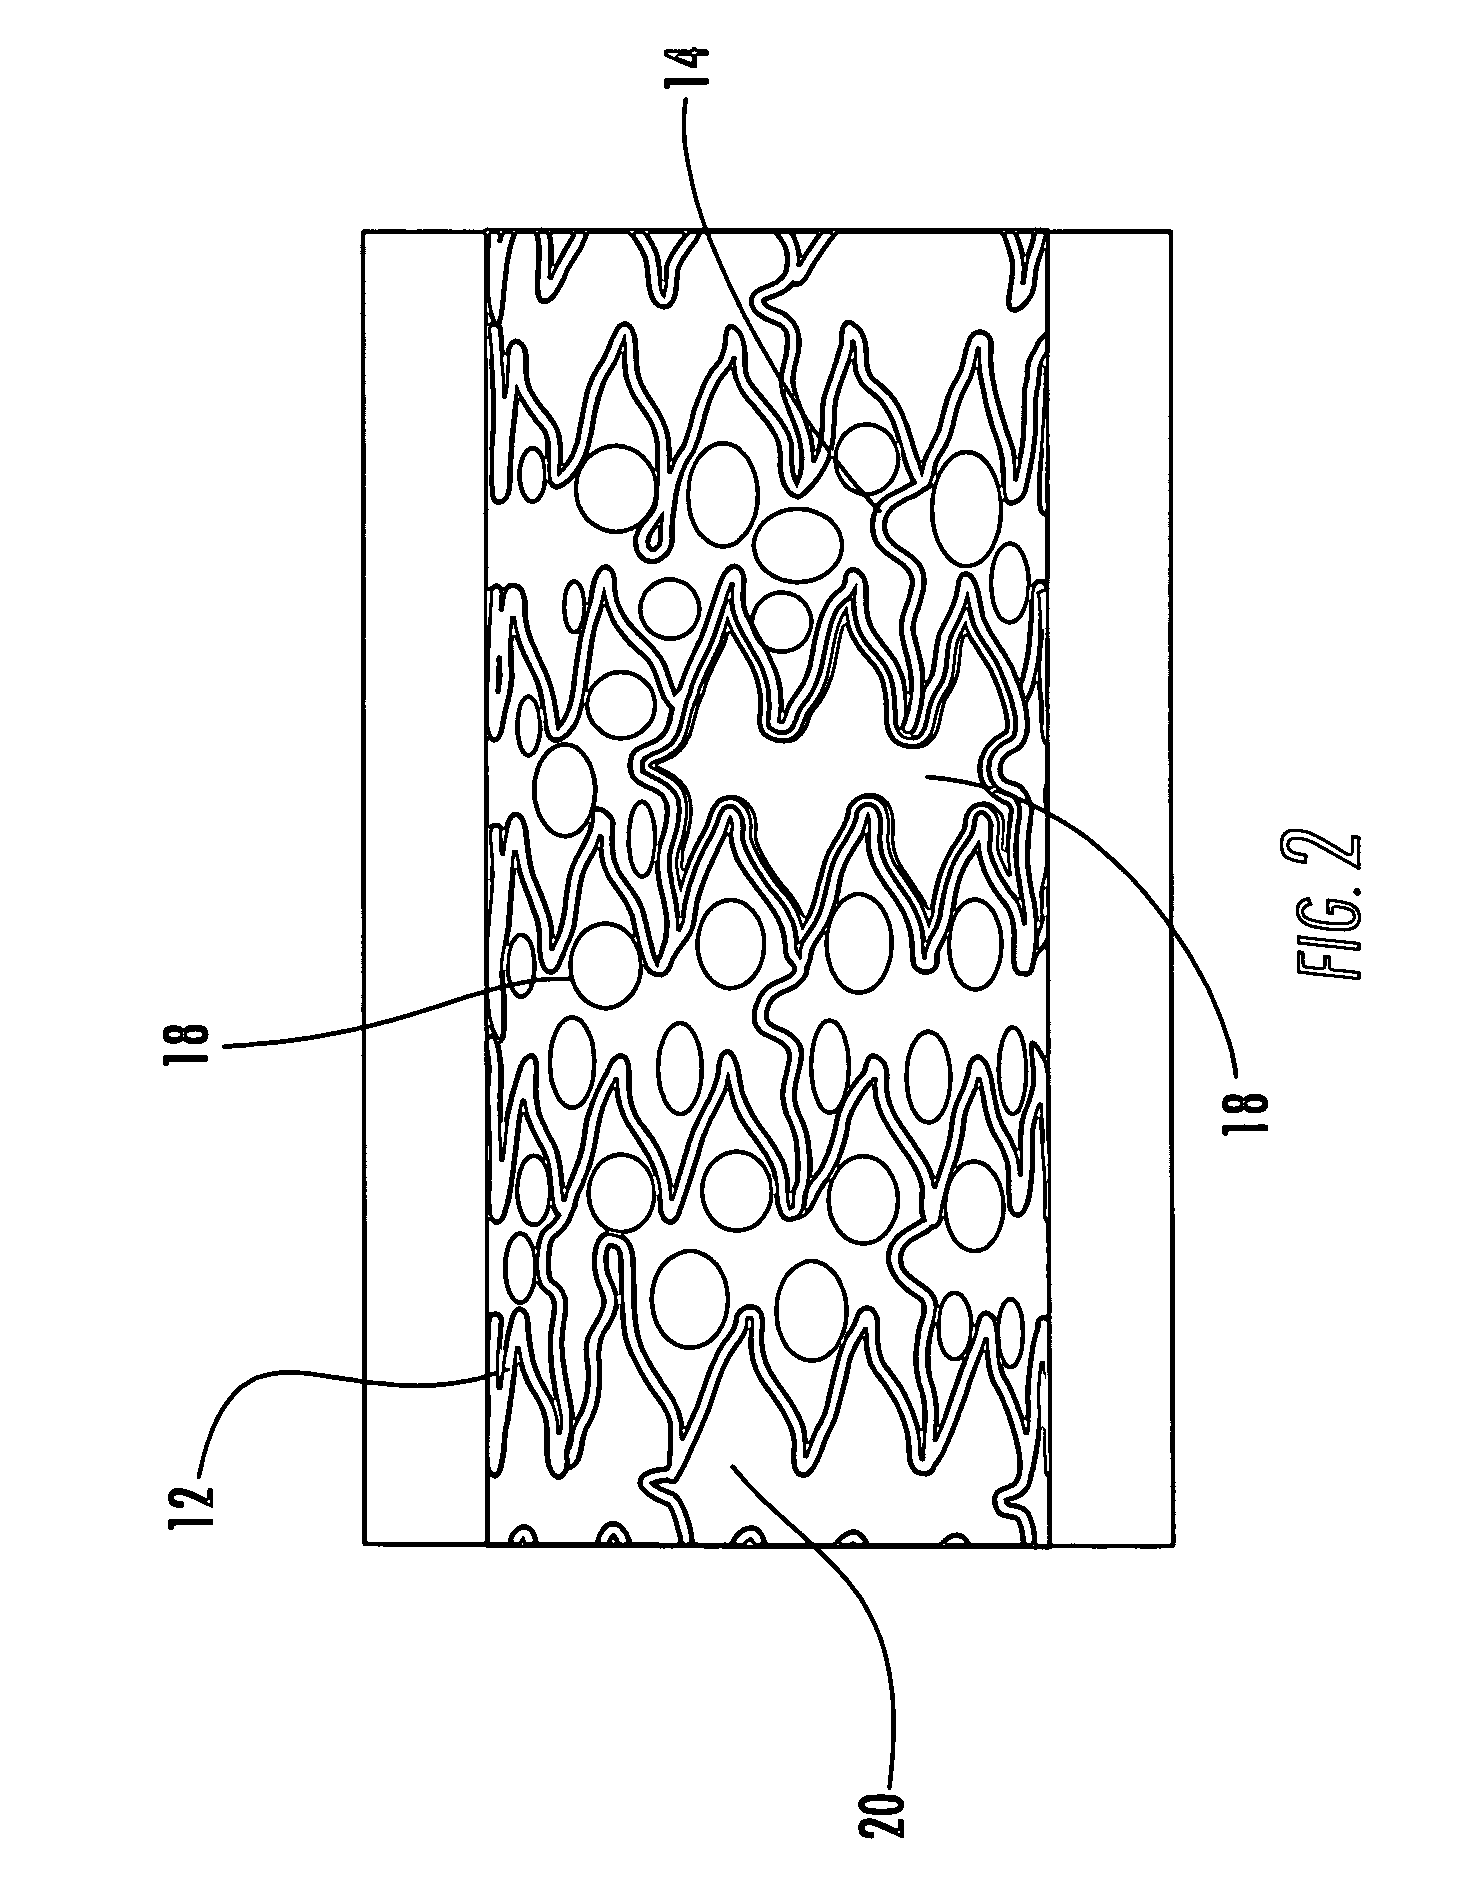 Drainage stent and associated method